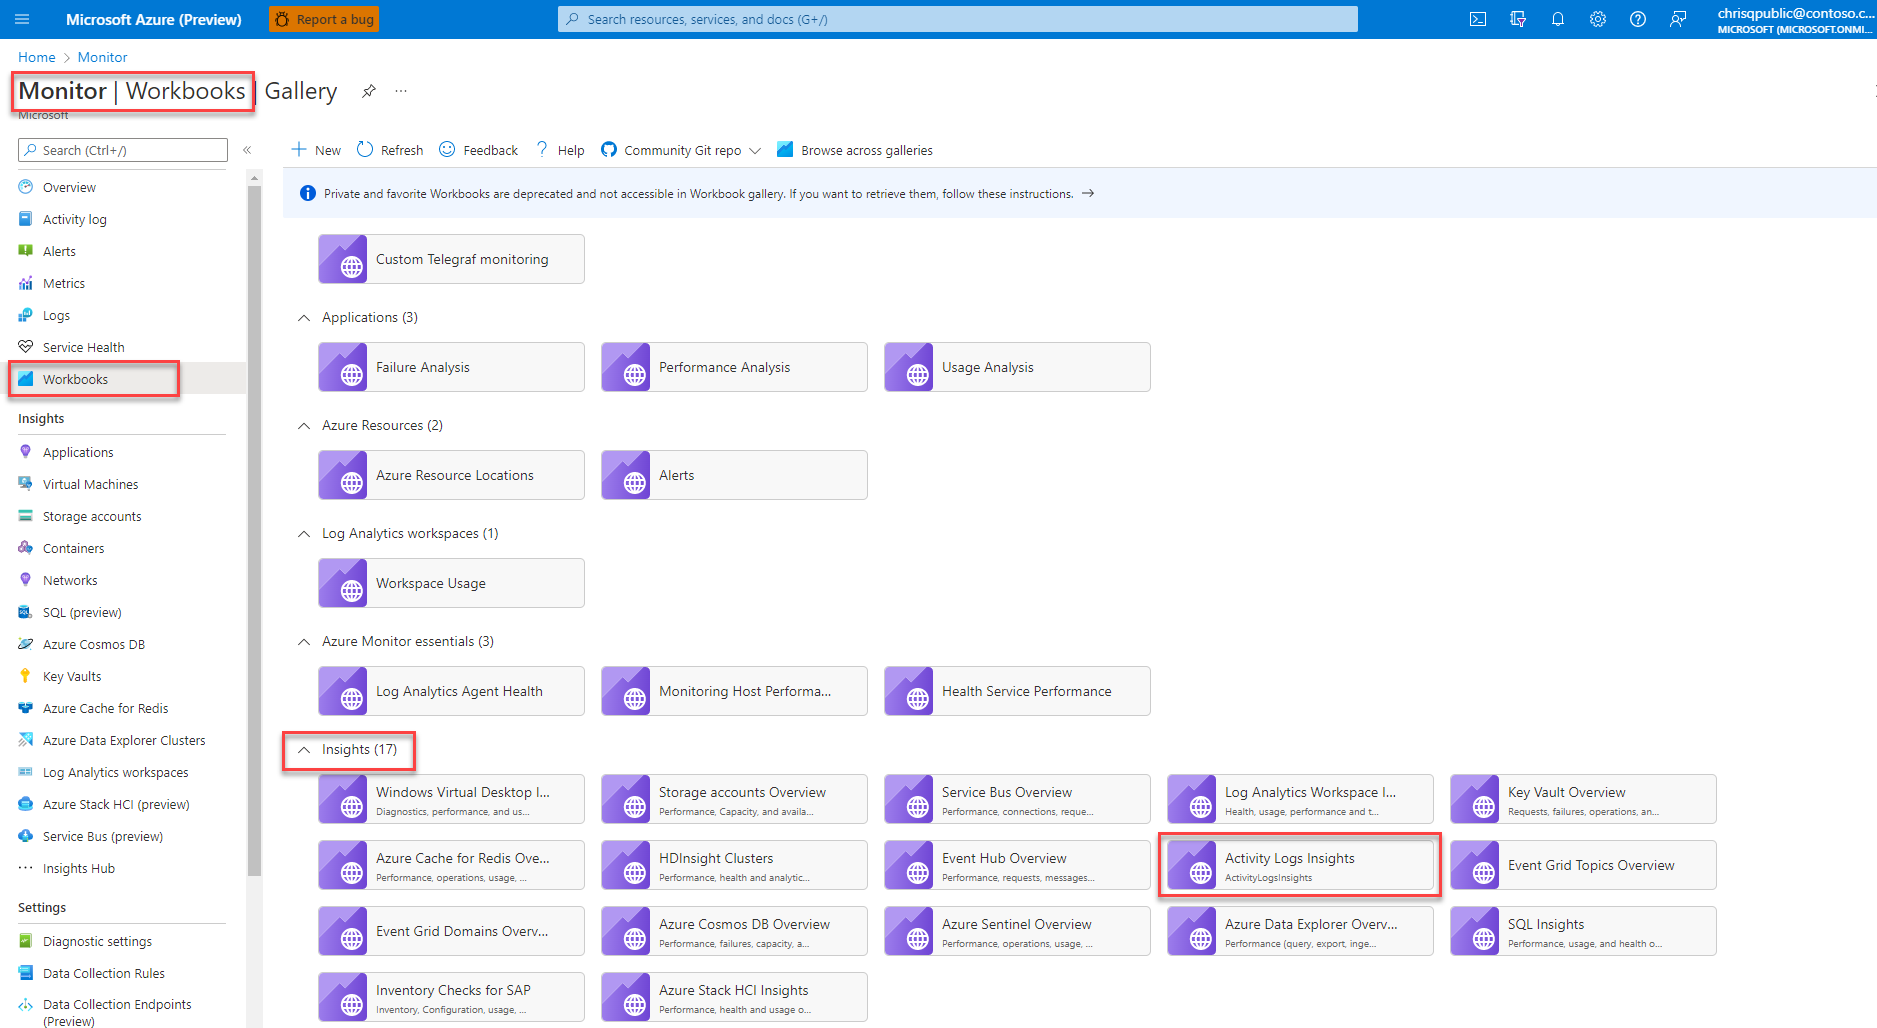 Screenshot that shows how to locate and open the Activity Logs Insights workbook on a scale level.